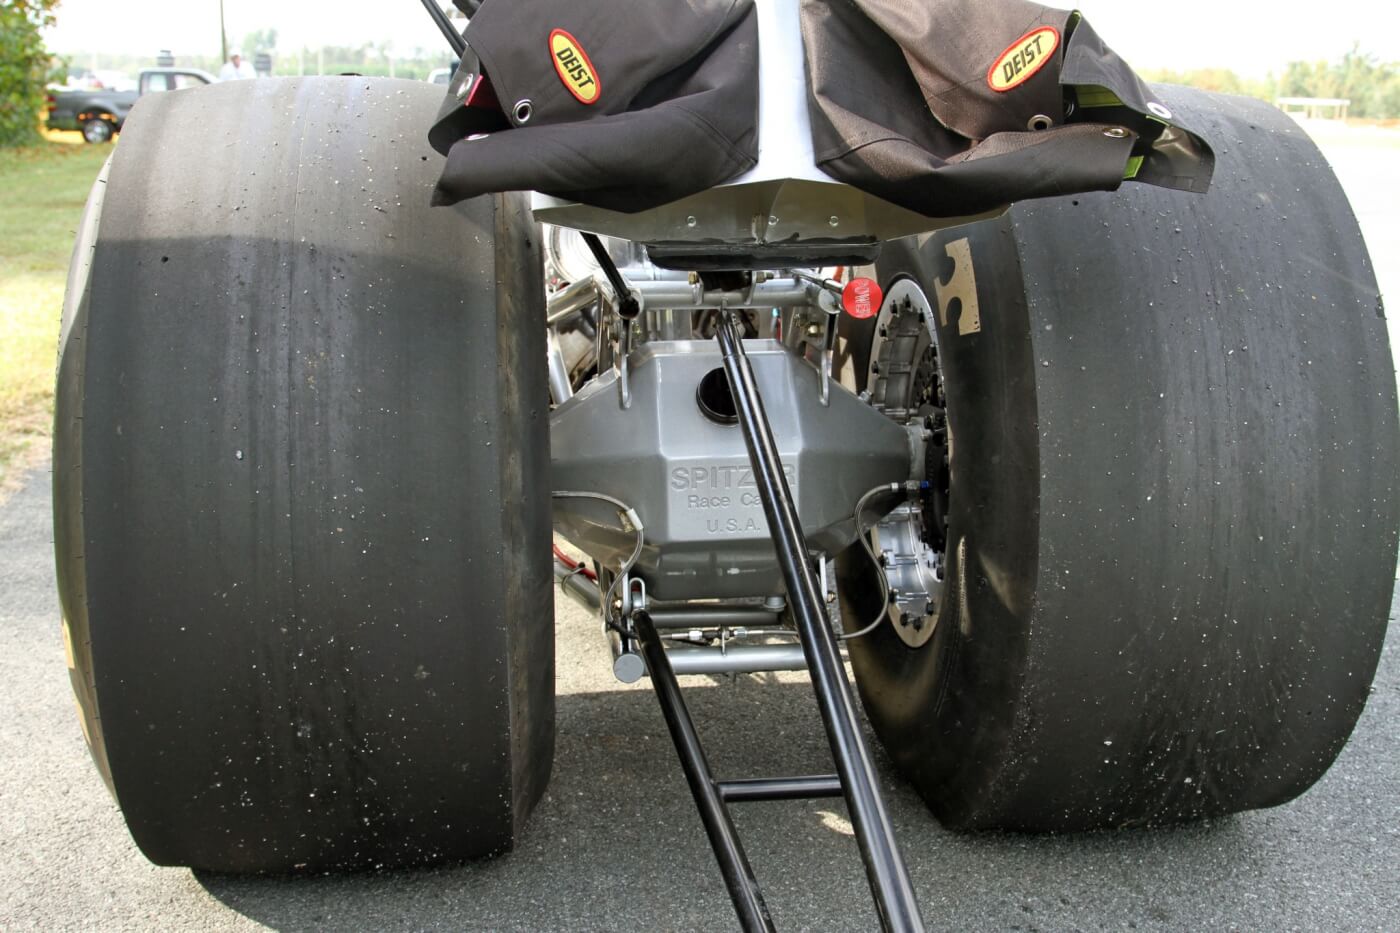 Looking at the rear of the dragster you see a lot of tire and a little rear axle, this setup is built for straight line speed.